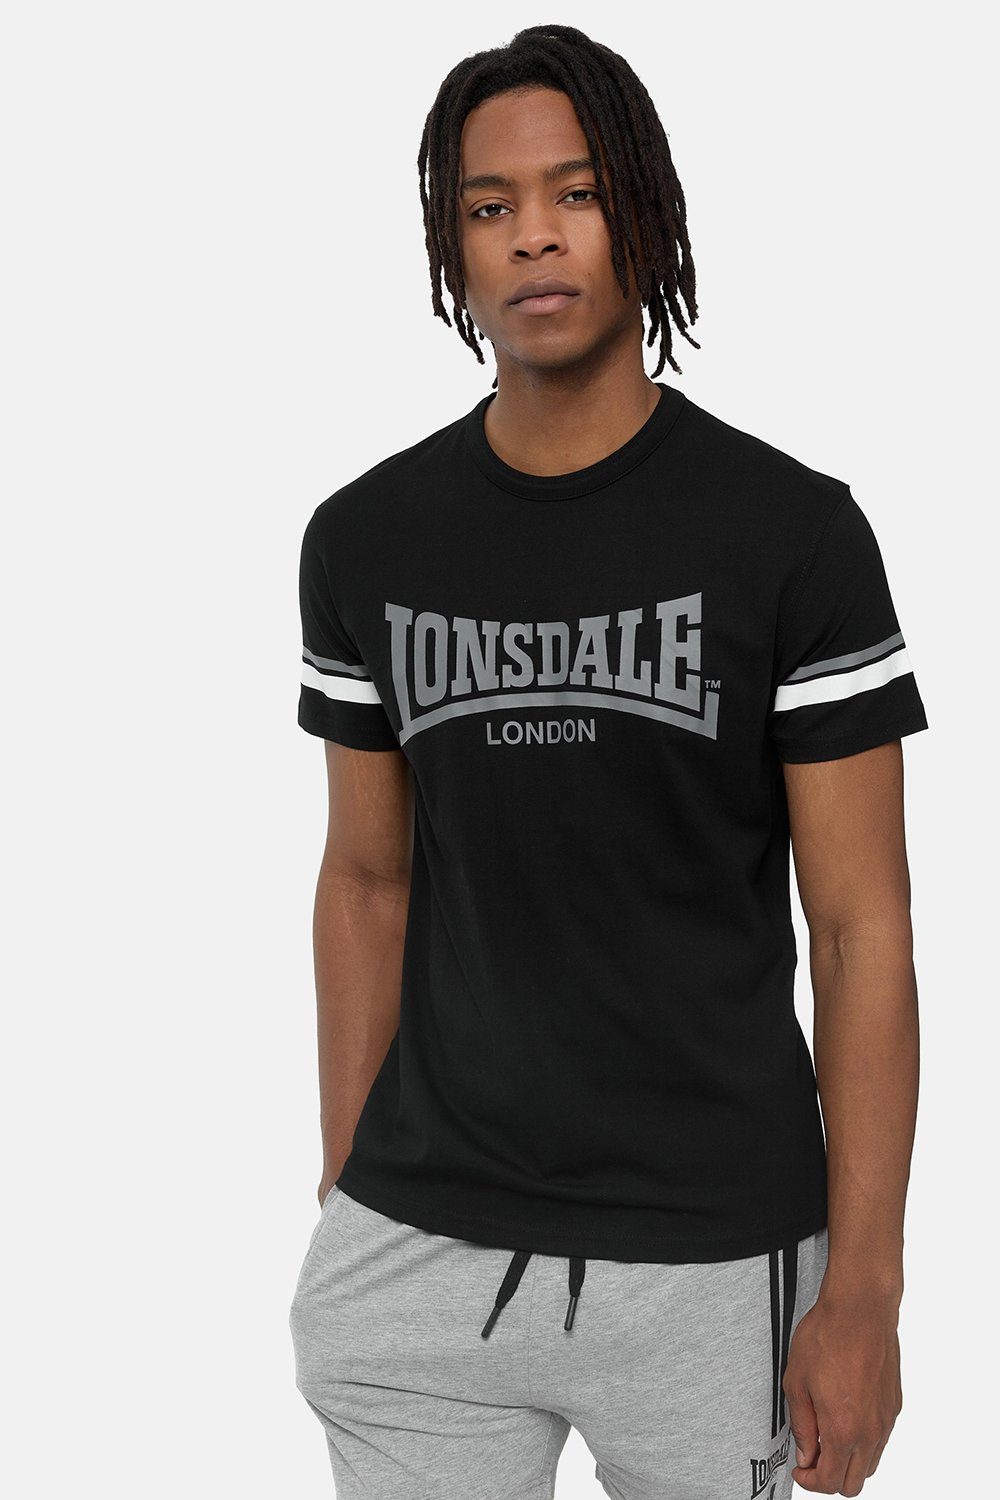 Lonsdale T-Shirt CREICH Sand/Navy/Red